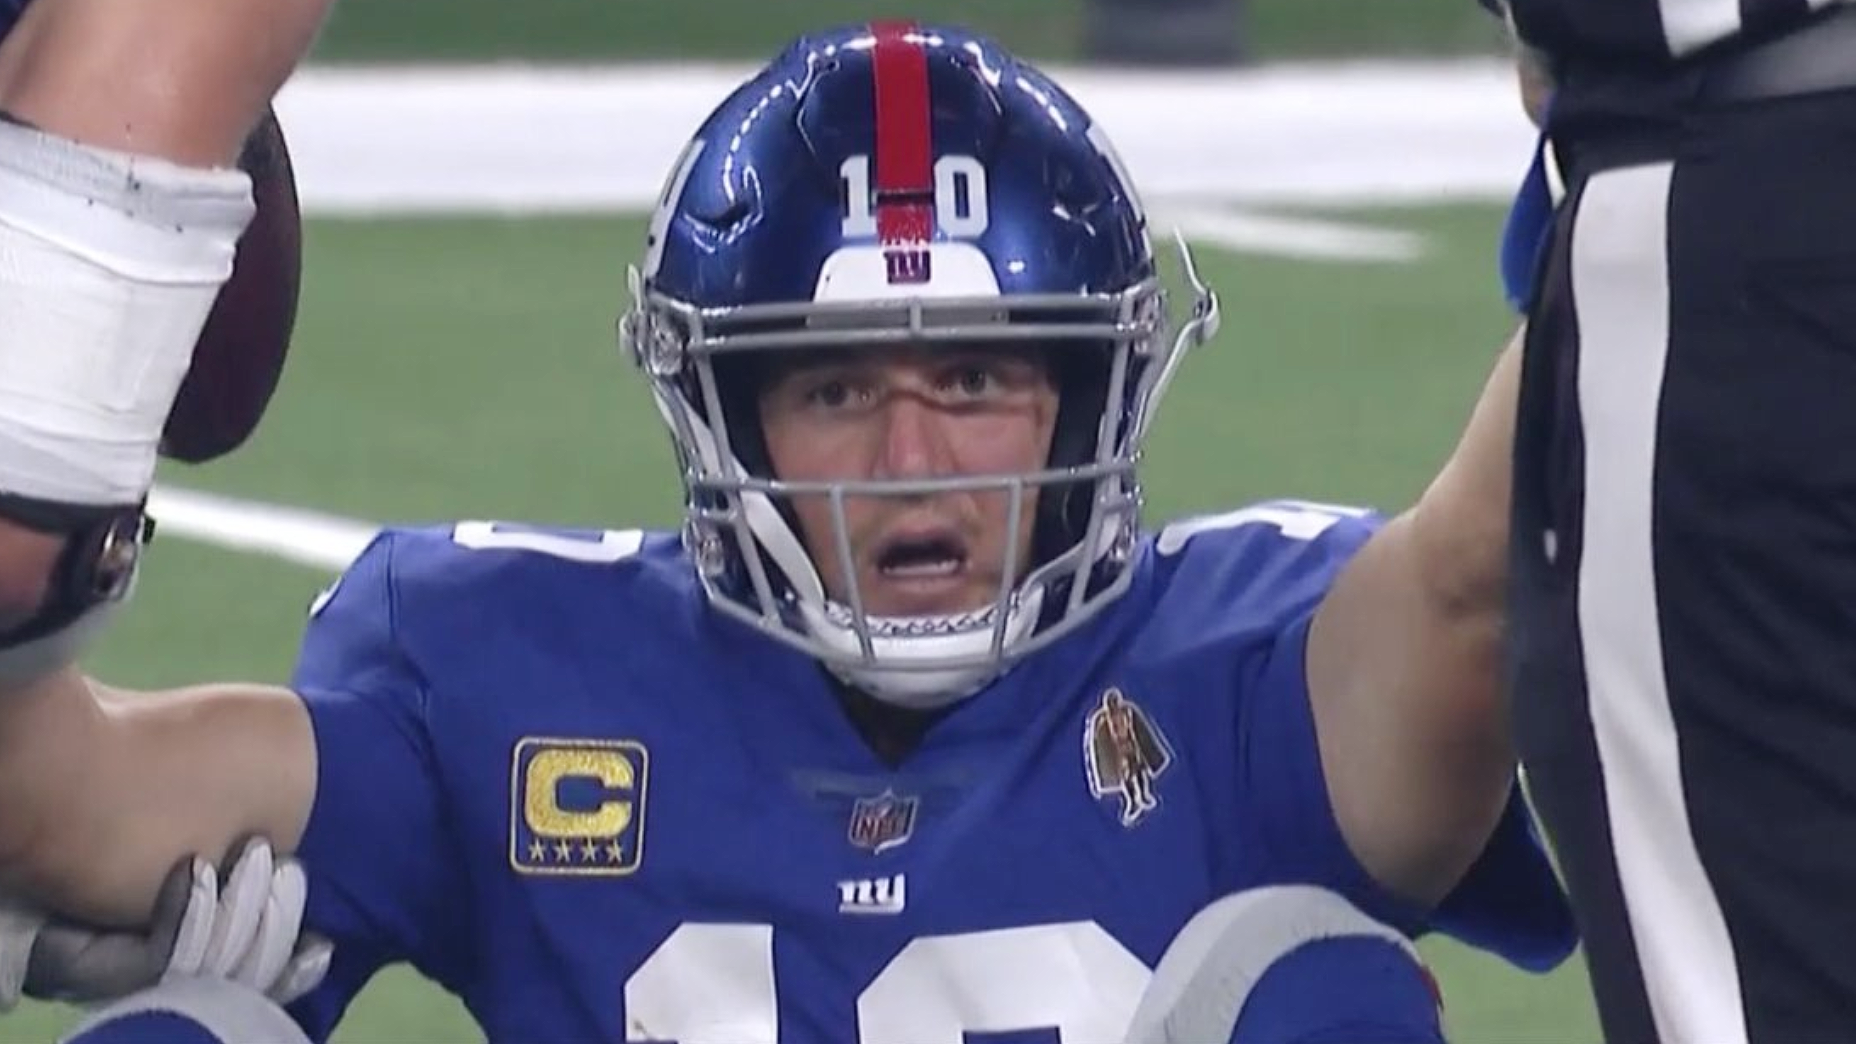 Eli Manning is the greatest Super Bowl QB who was mediocre otherwise 